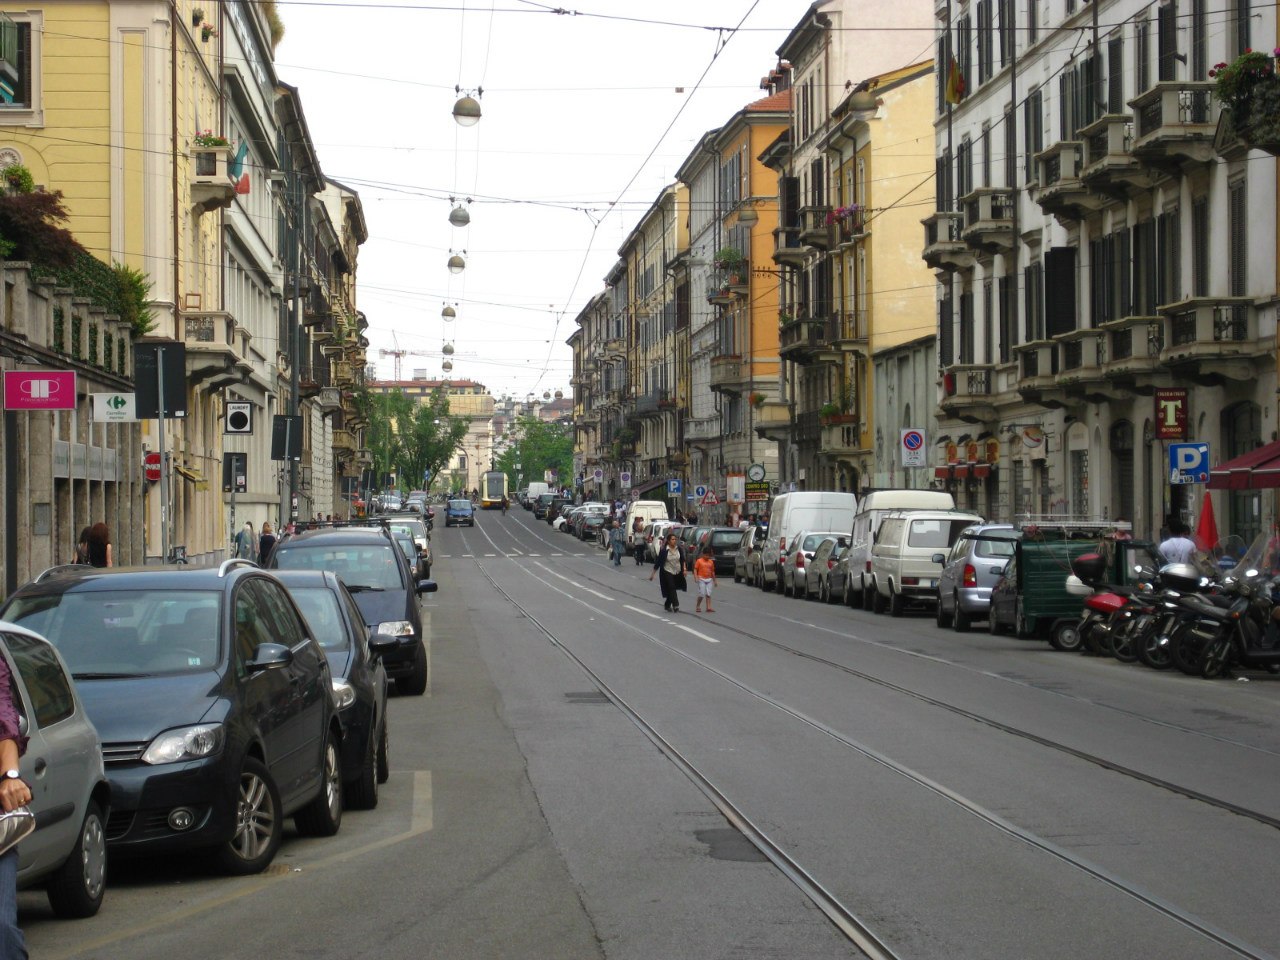 The 4 days in Milano. 26-29.05.12